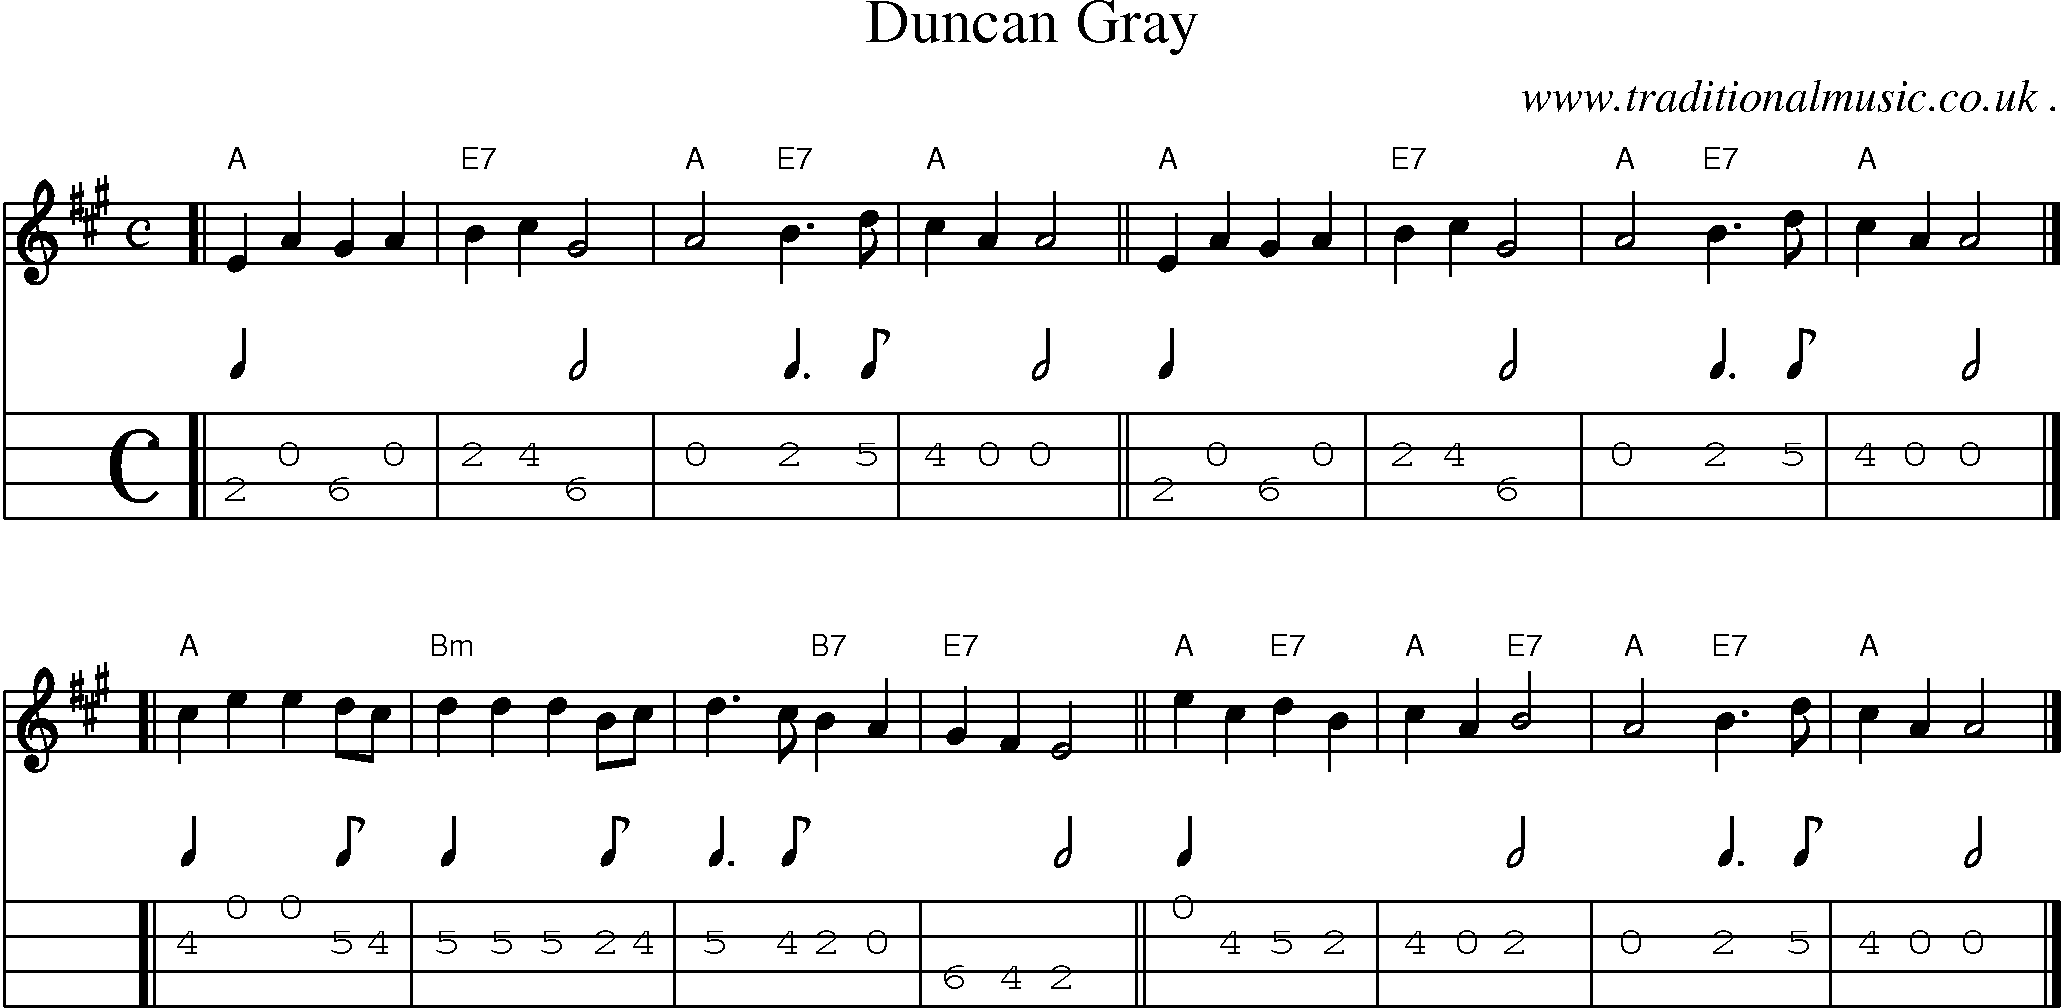 Sheet-music  score, Chords and Mandolin Tabs for Duncan Gray